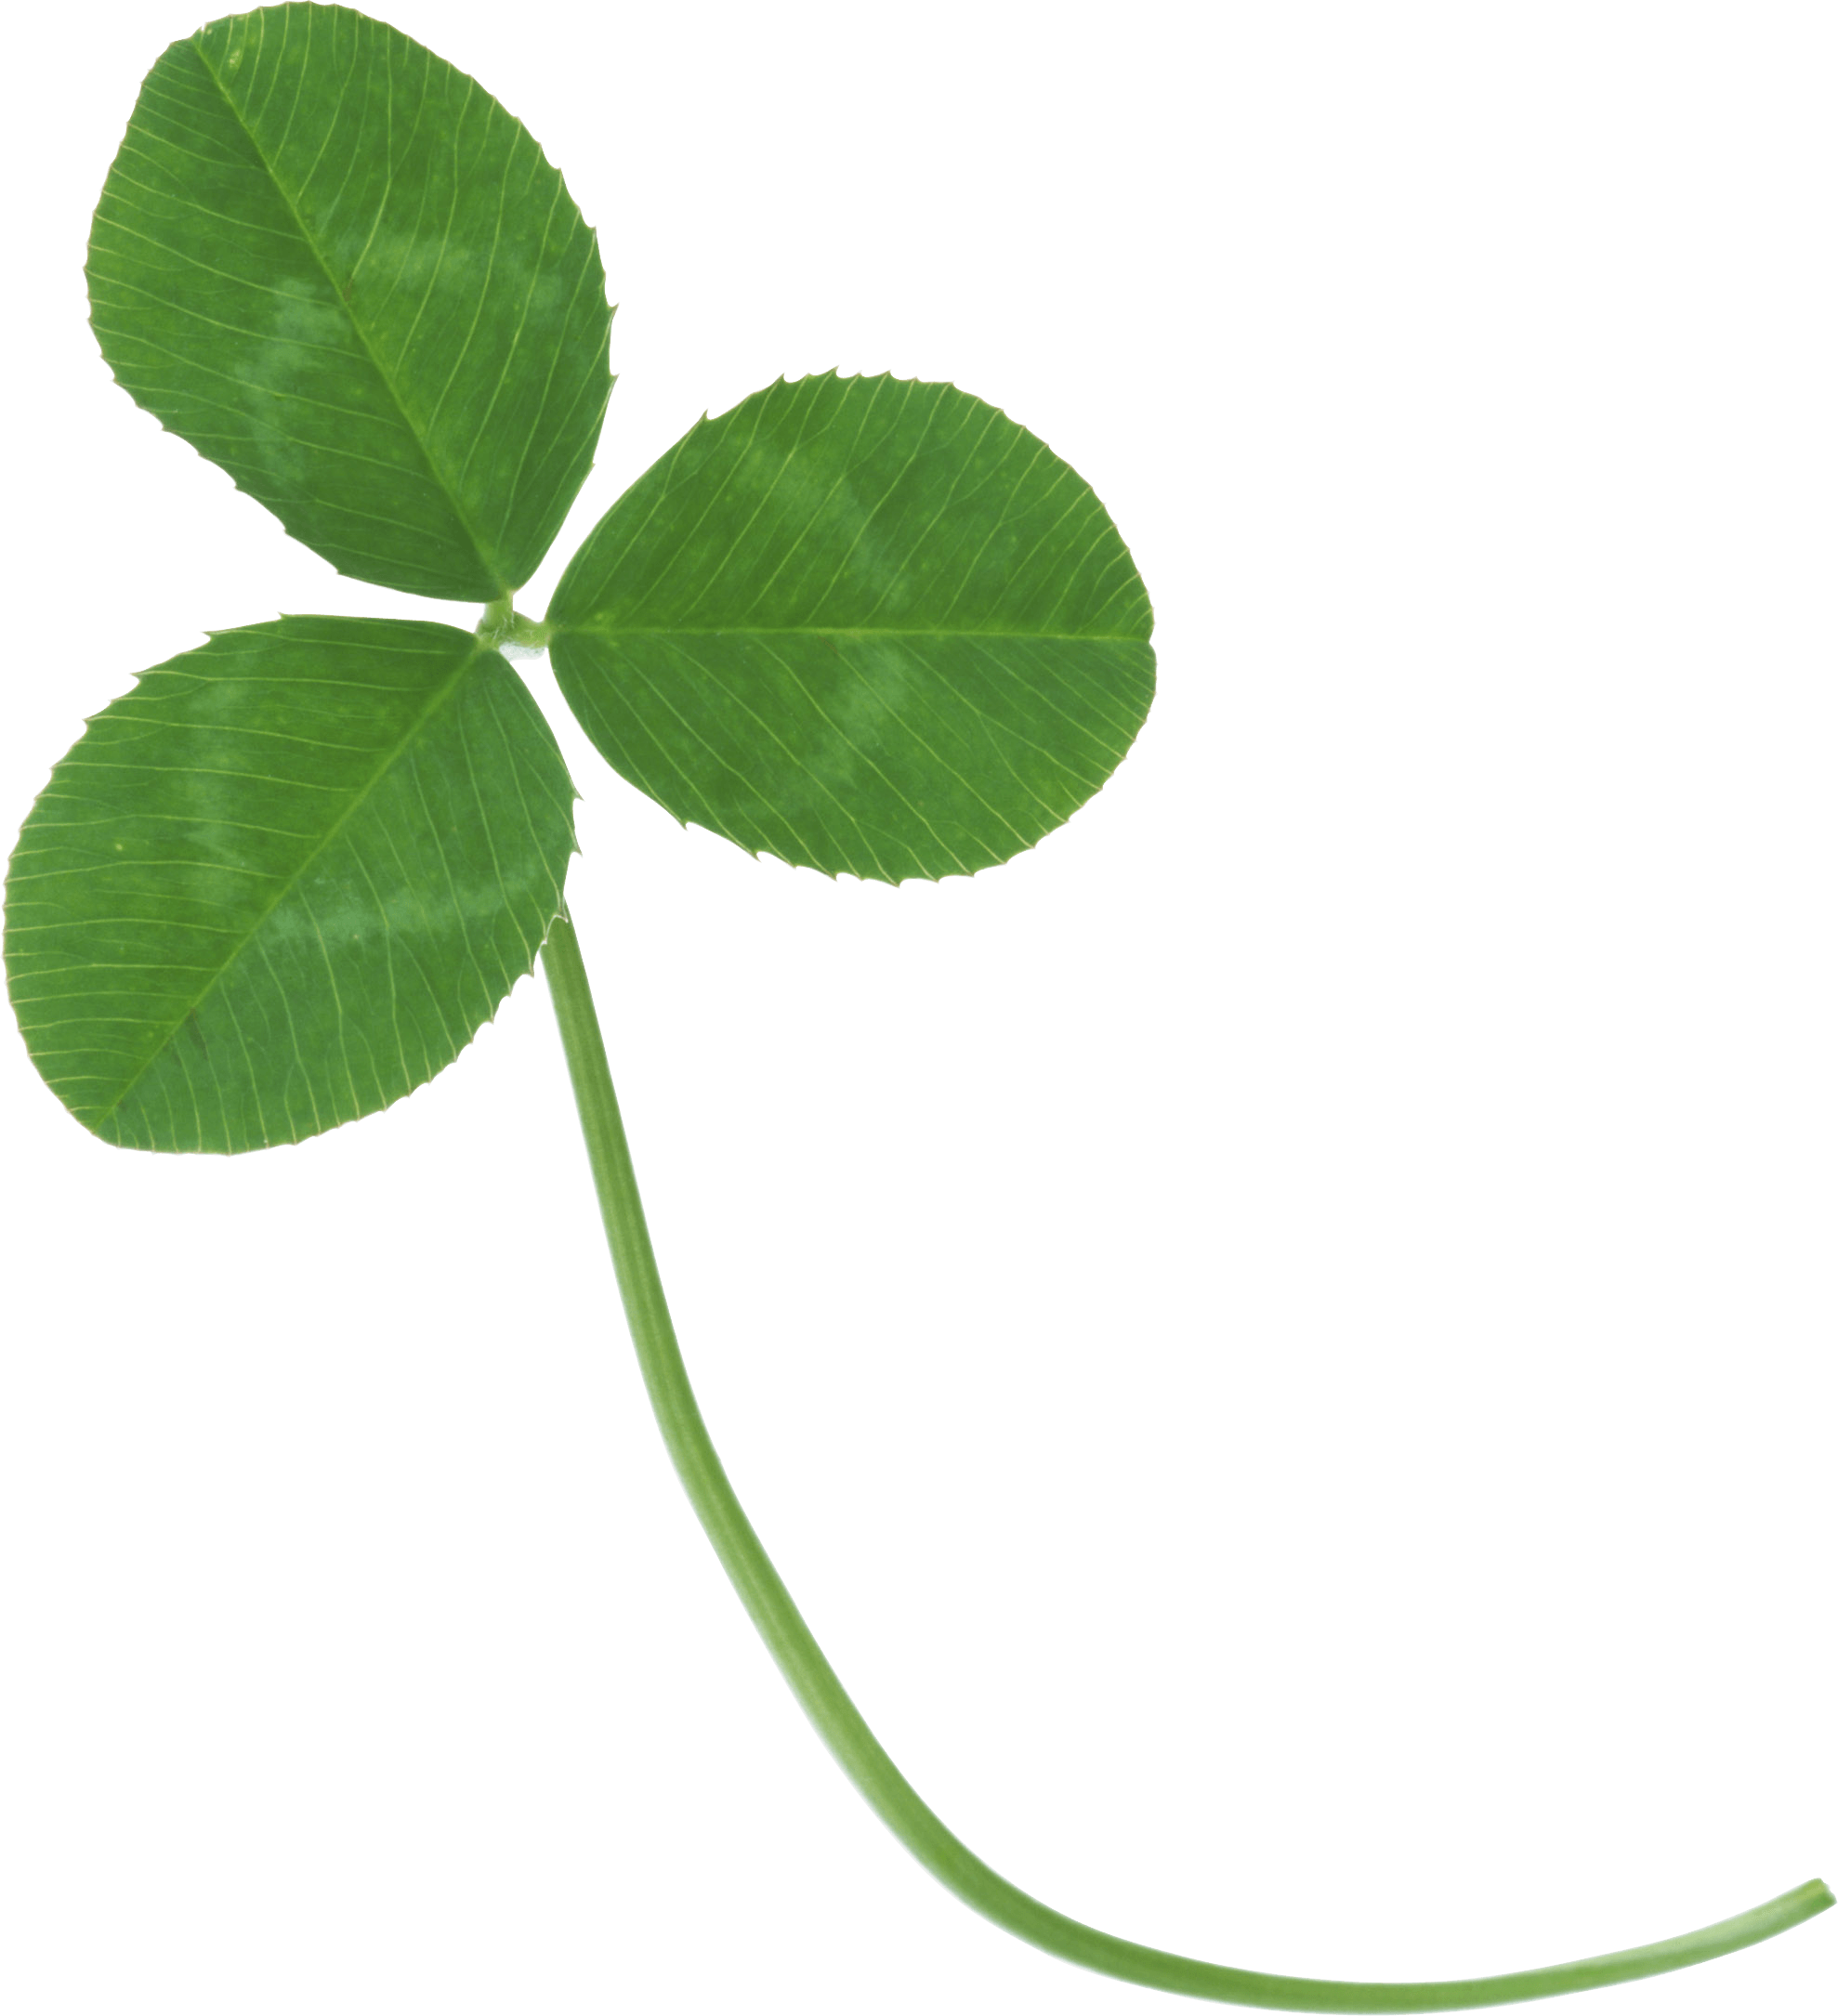 Clover Png Image PNG Image